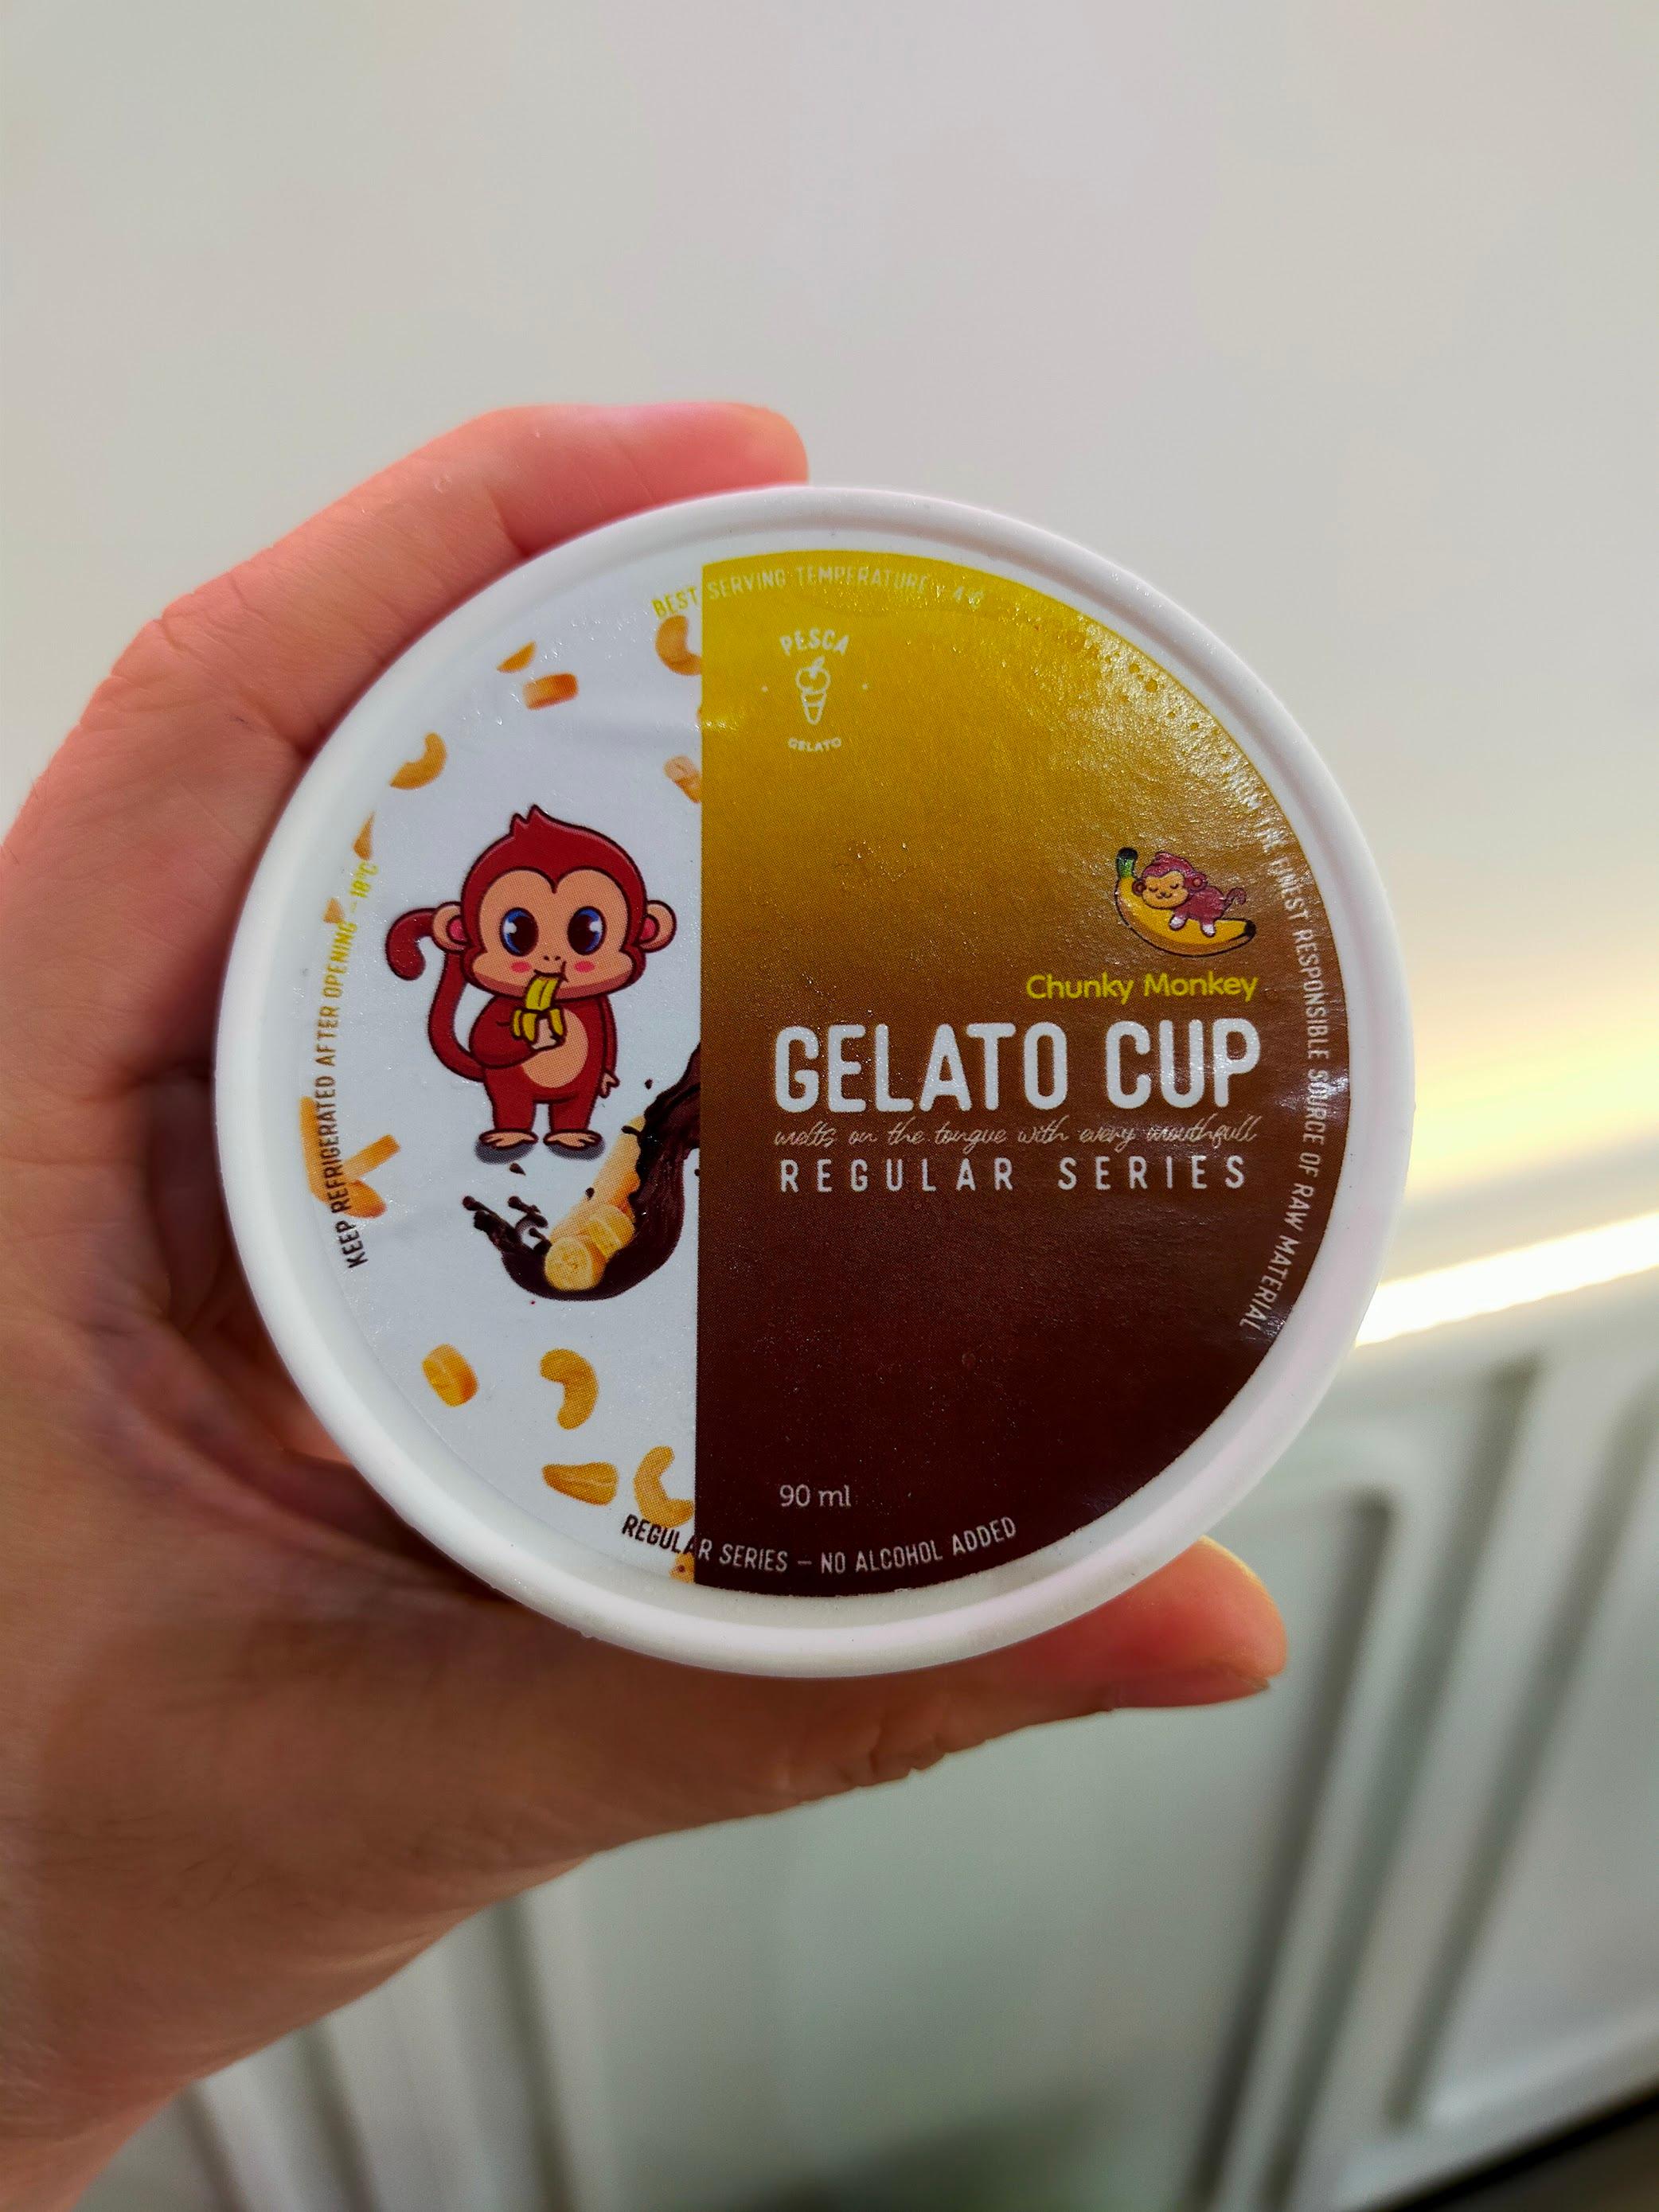 Pesca Gelato Station Gading Serpong review